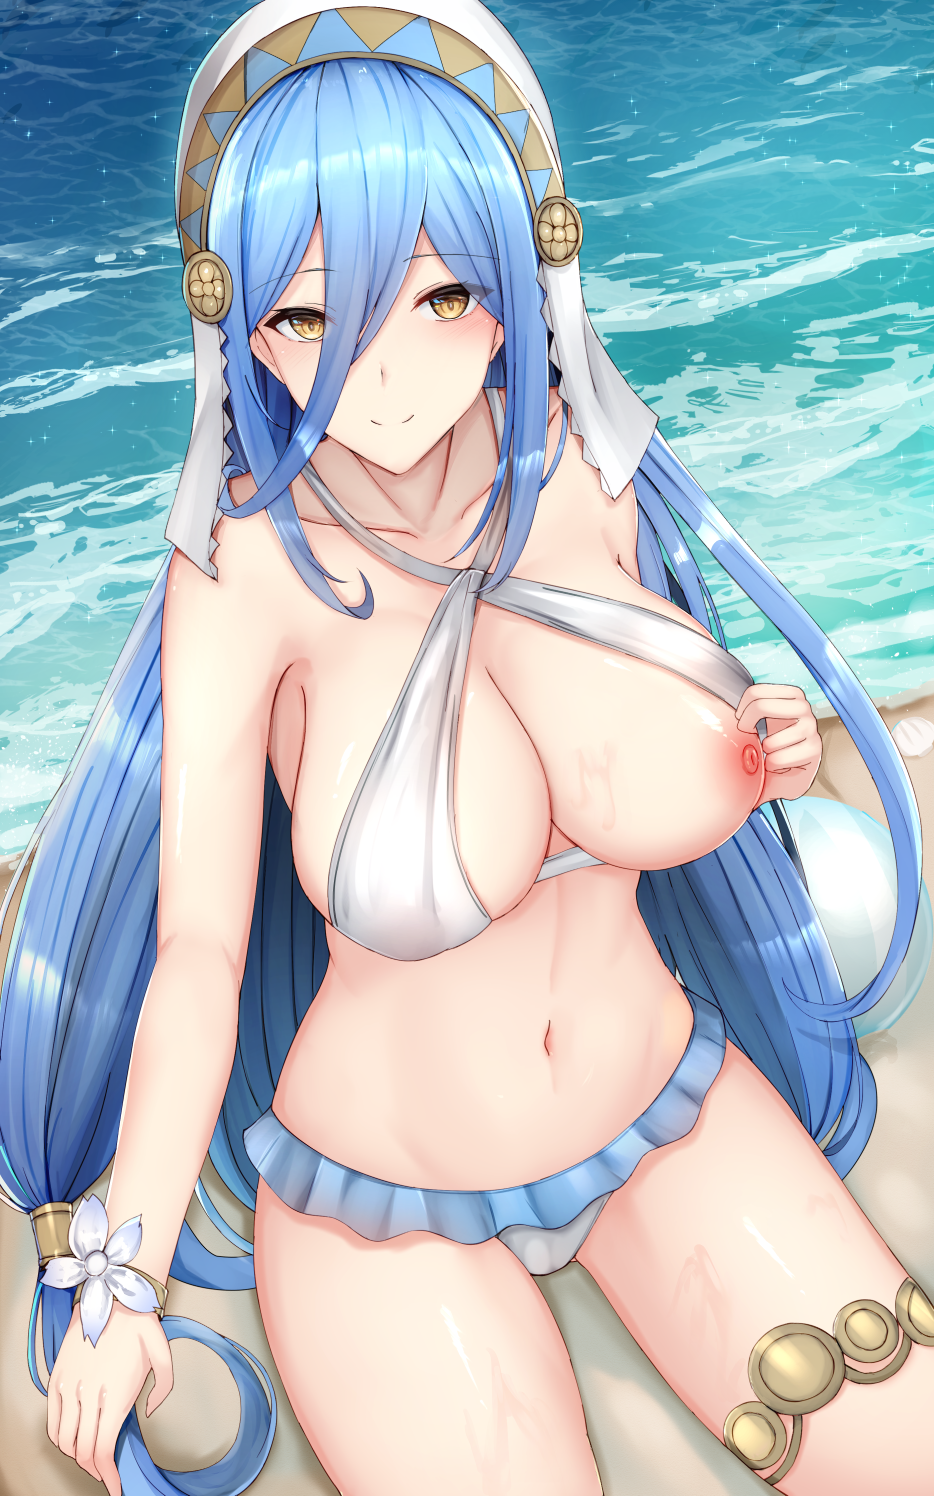 __azura_fire_emblem_and_1_more_drawn_by_chiyo_pk19981234__7feaa17195608b87b536d6900894a9f9.png